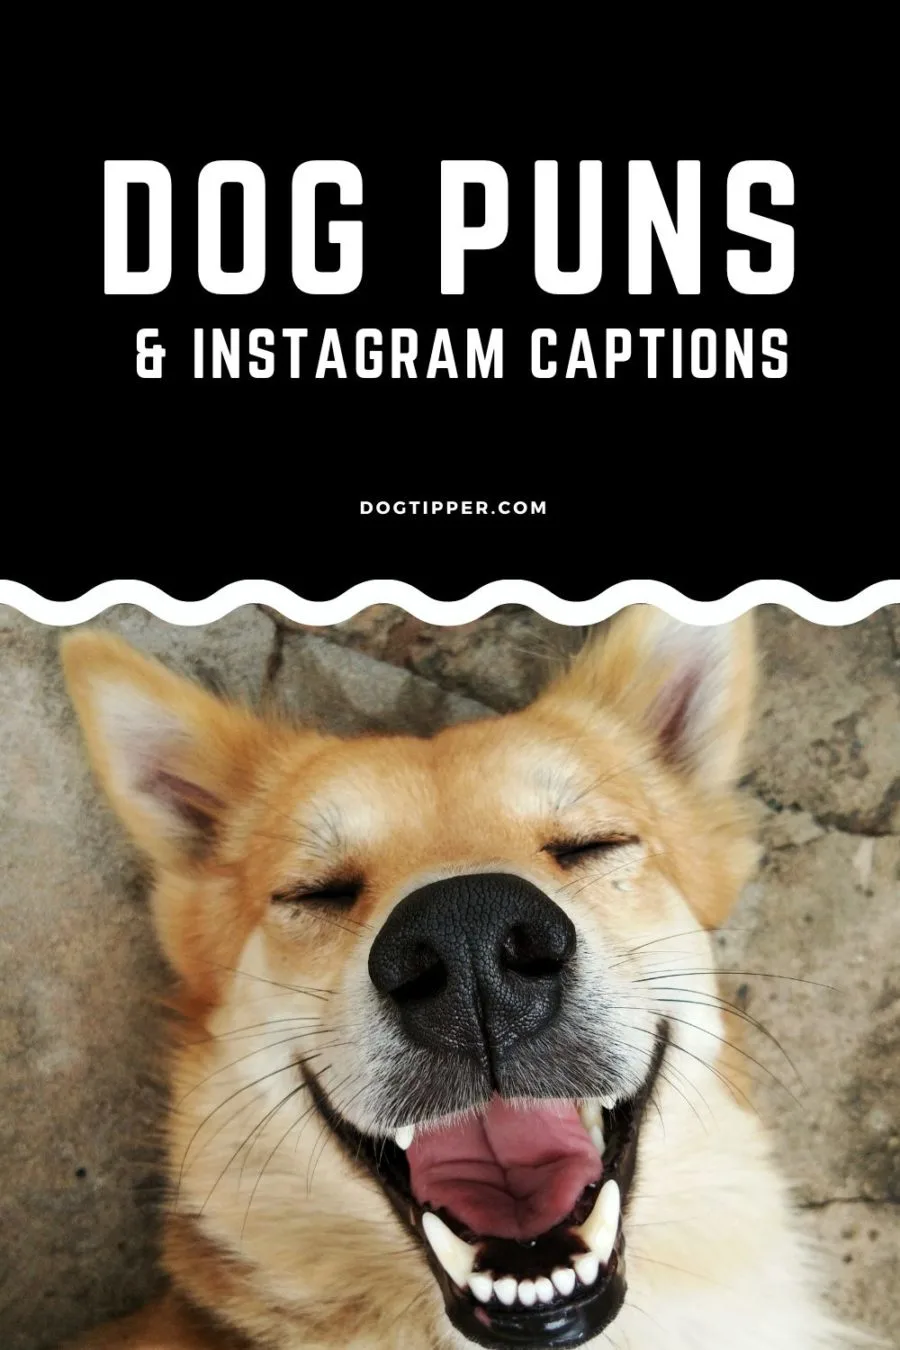 Dog Puns and Instagram Captions